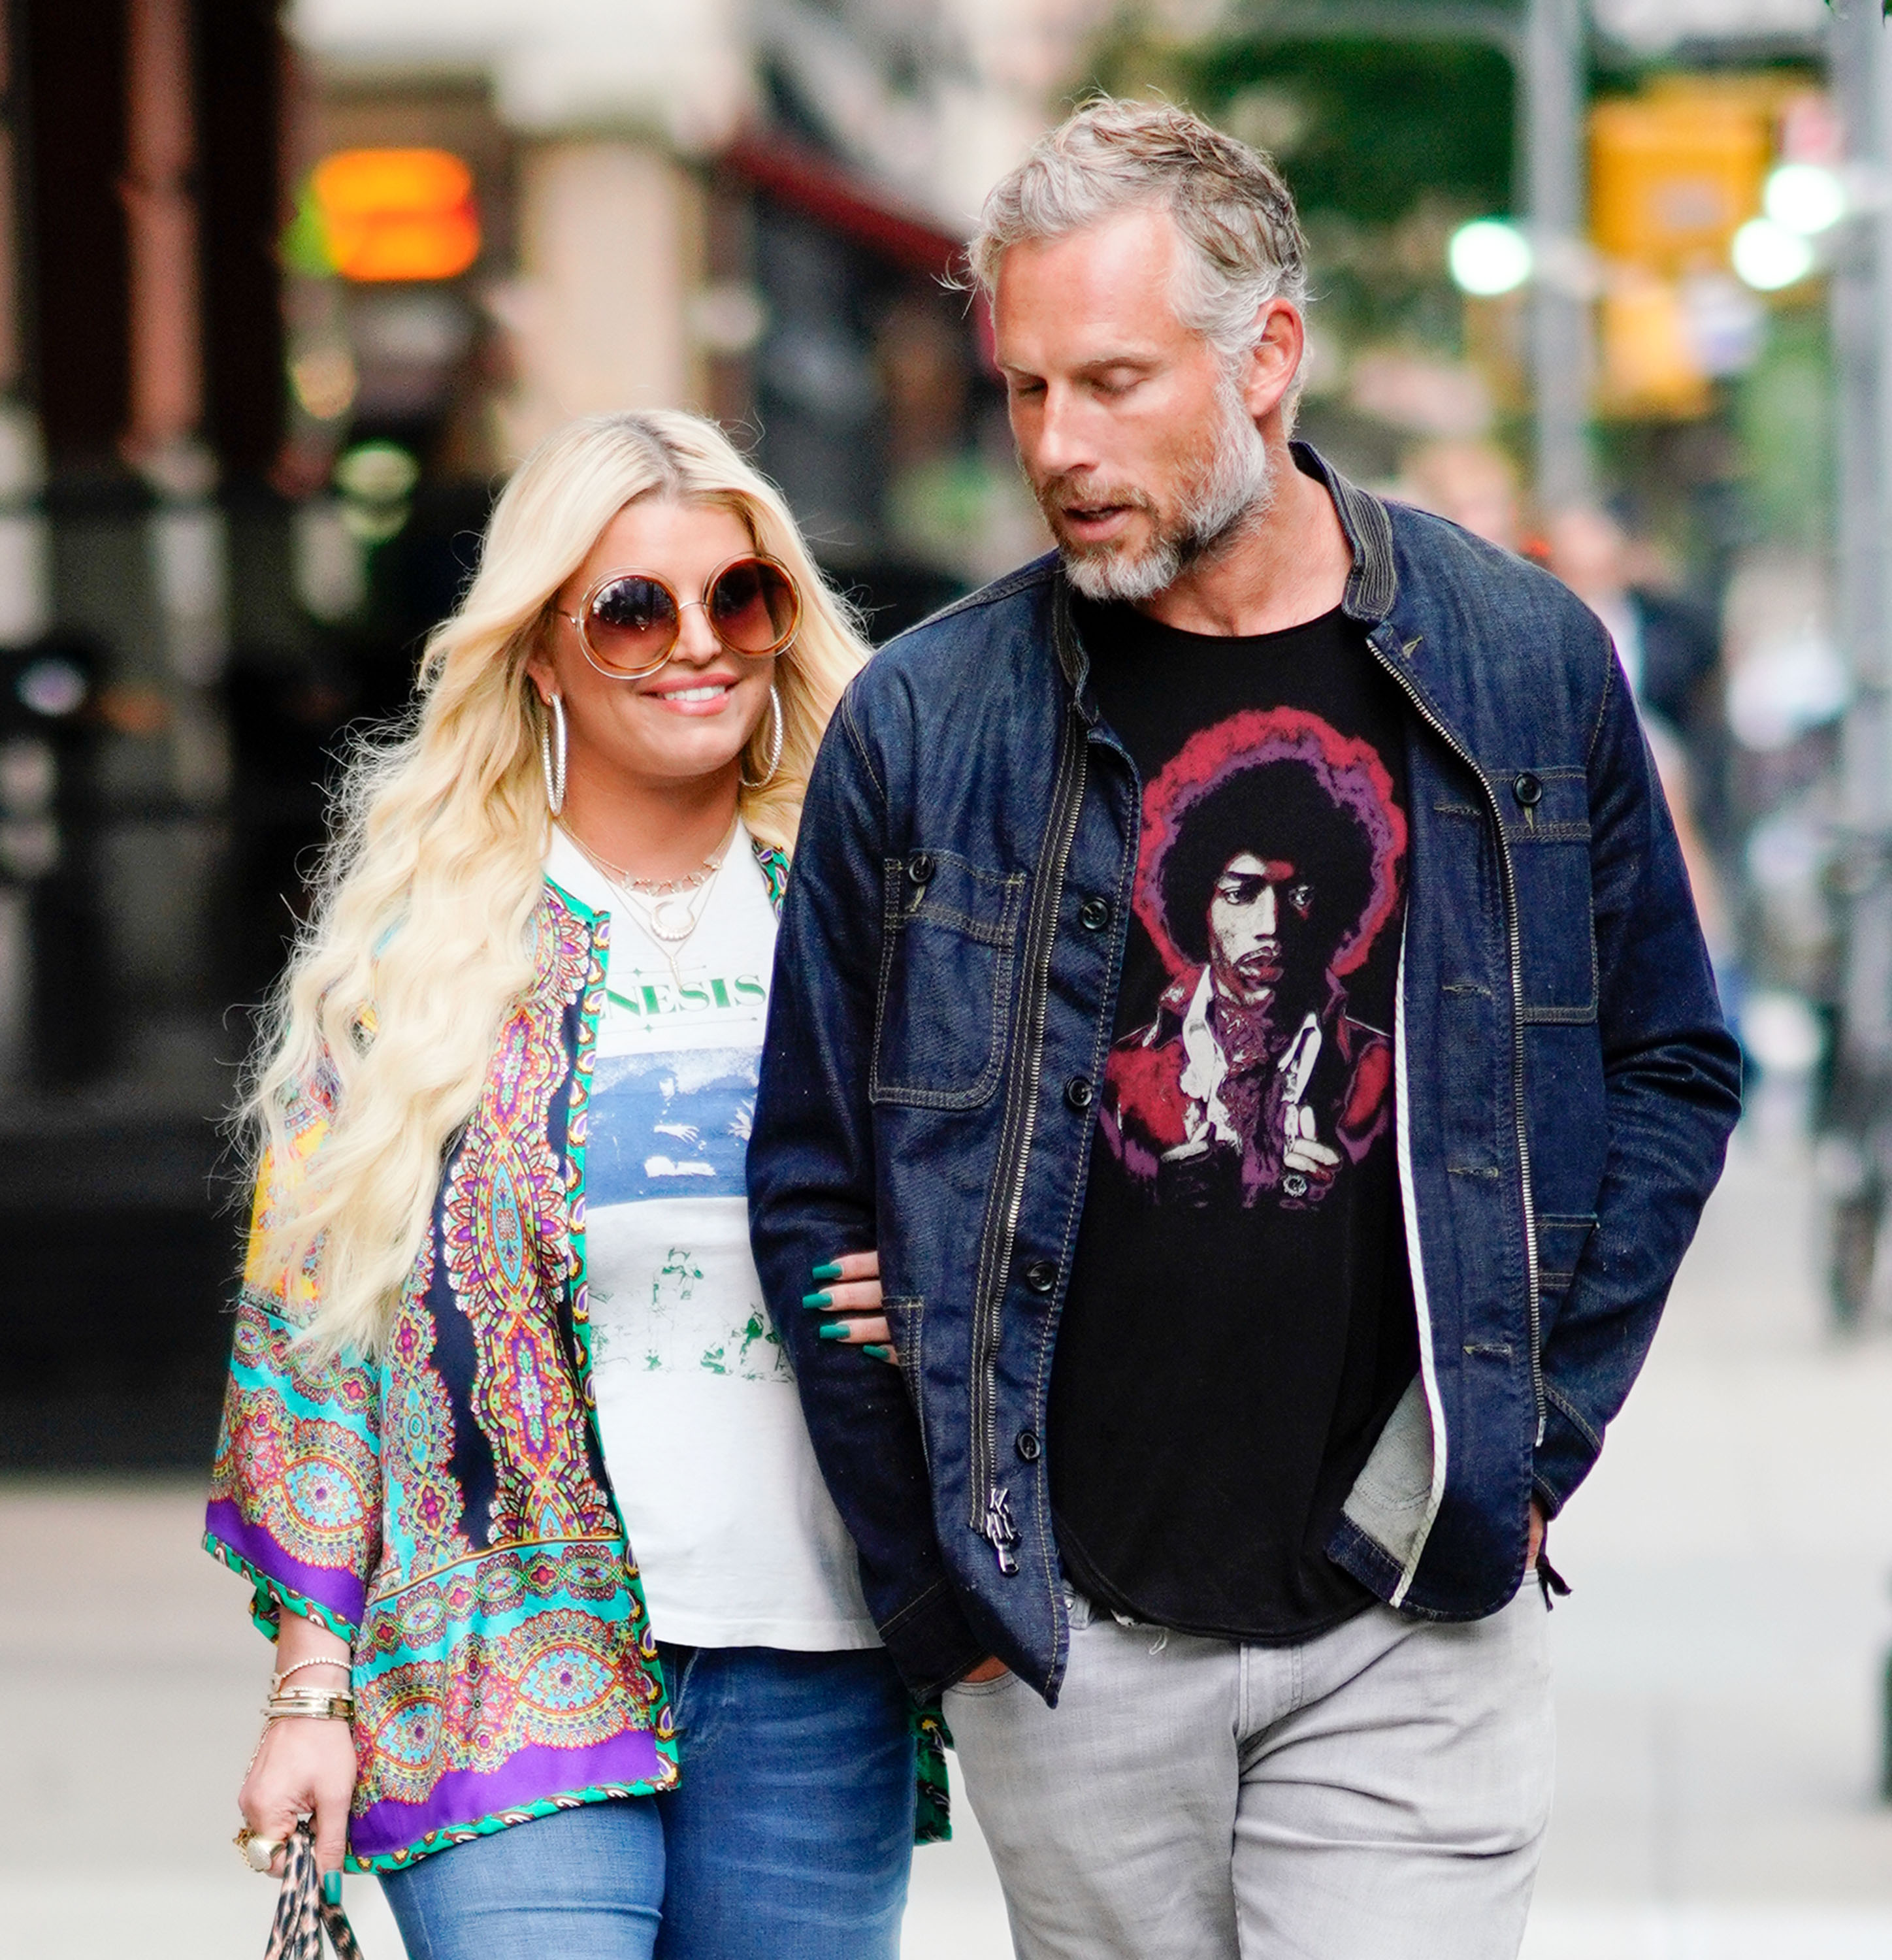 Jessica Simpson and ERic Johnson head out for dinner in New York